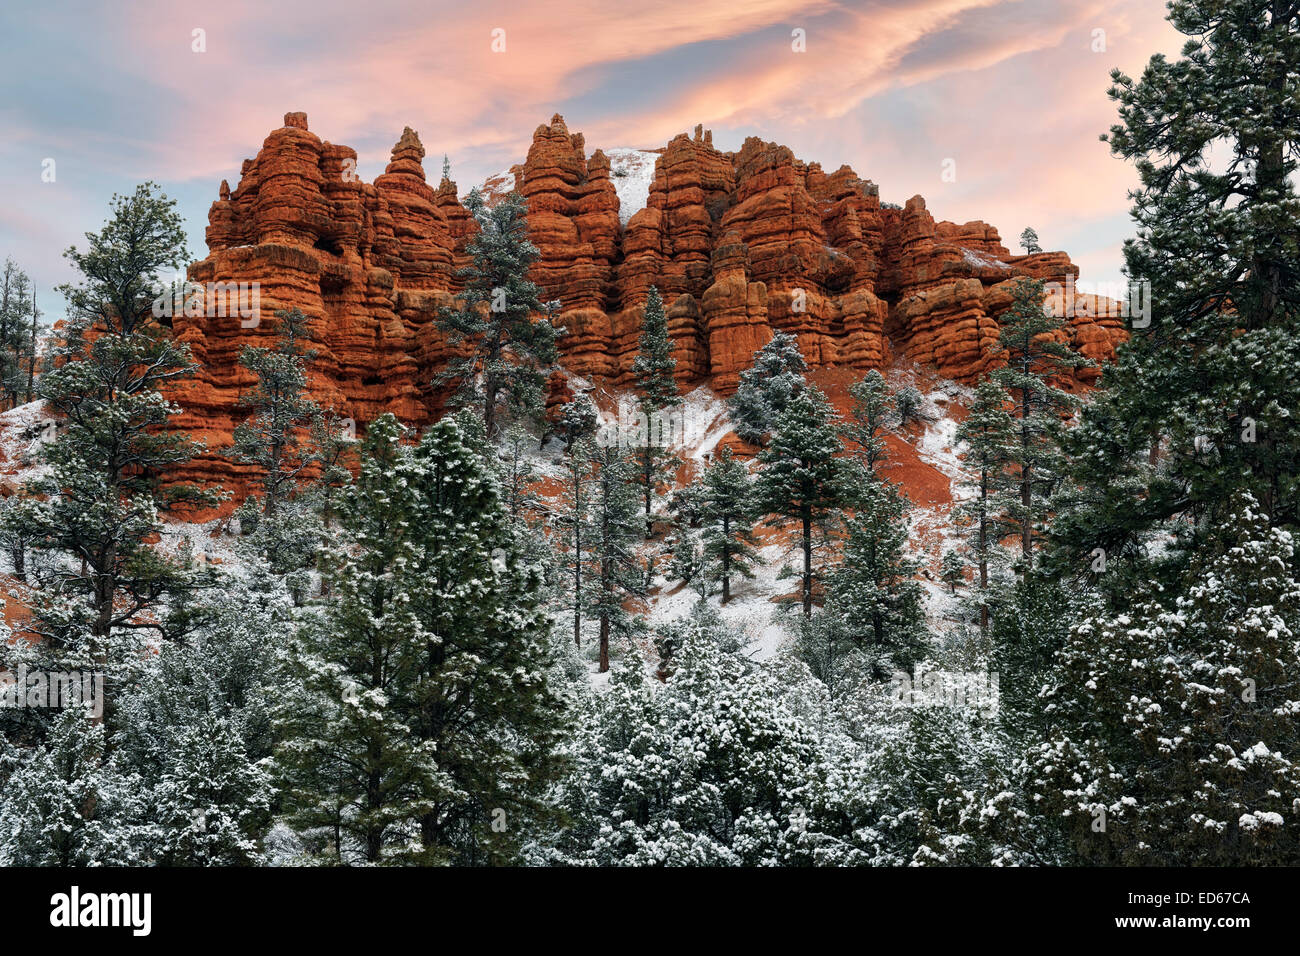 Autumn snowfall adds to the beauty of Red Canyon in Utah's Dixie National Forest and near Bryce Canyon National Park. Stock Photo